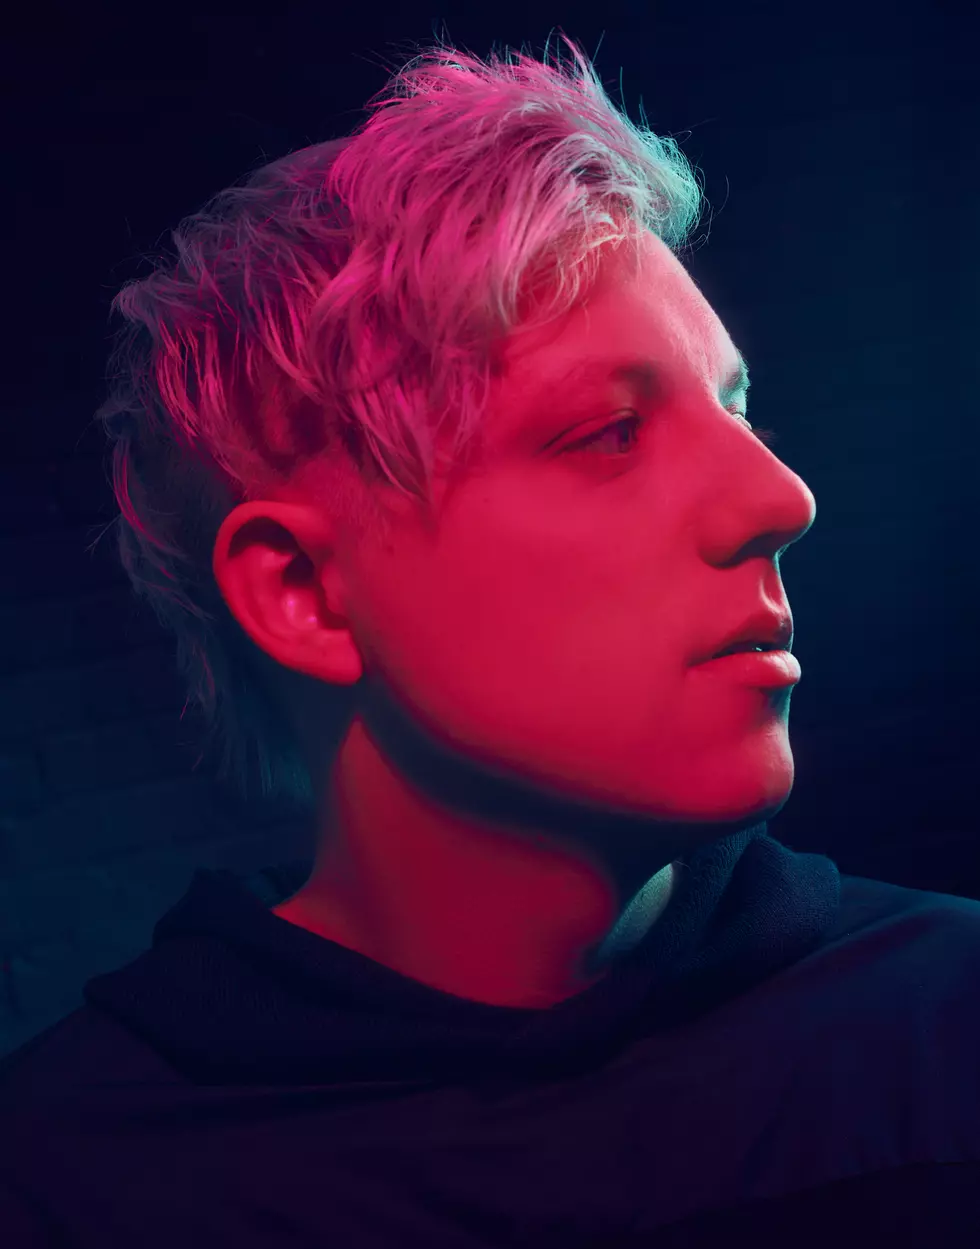 X-RATED: Join Robert DeLong at the Downtown Artery